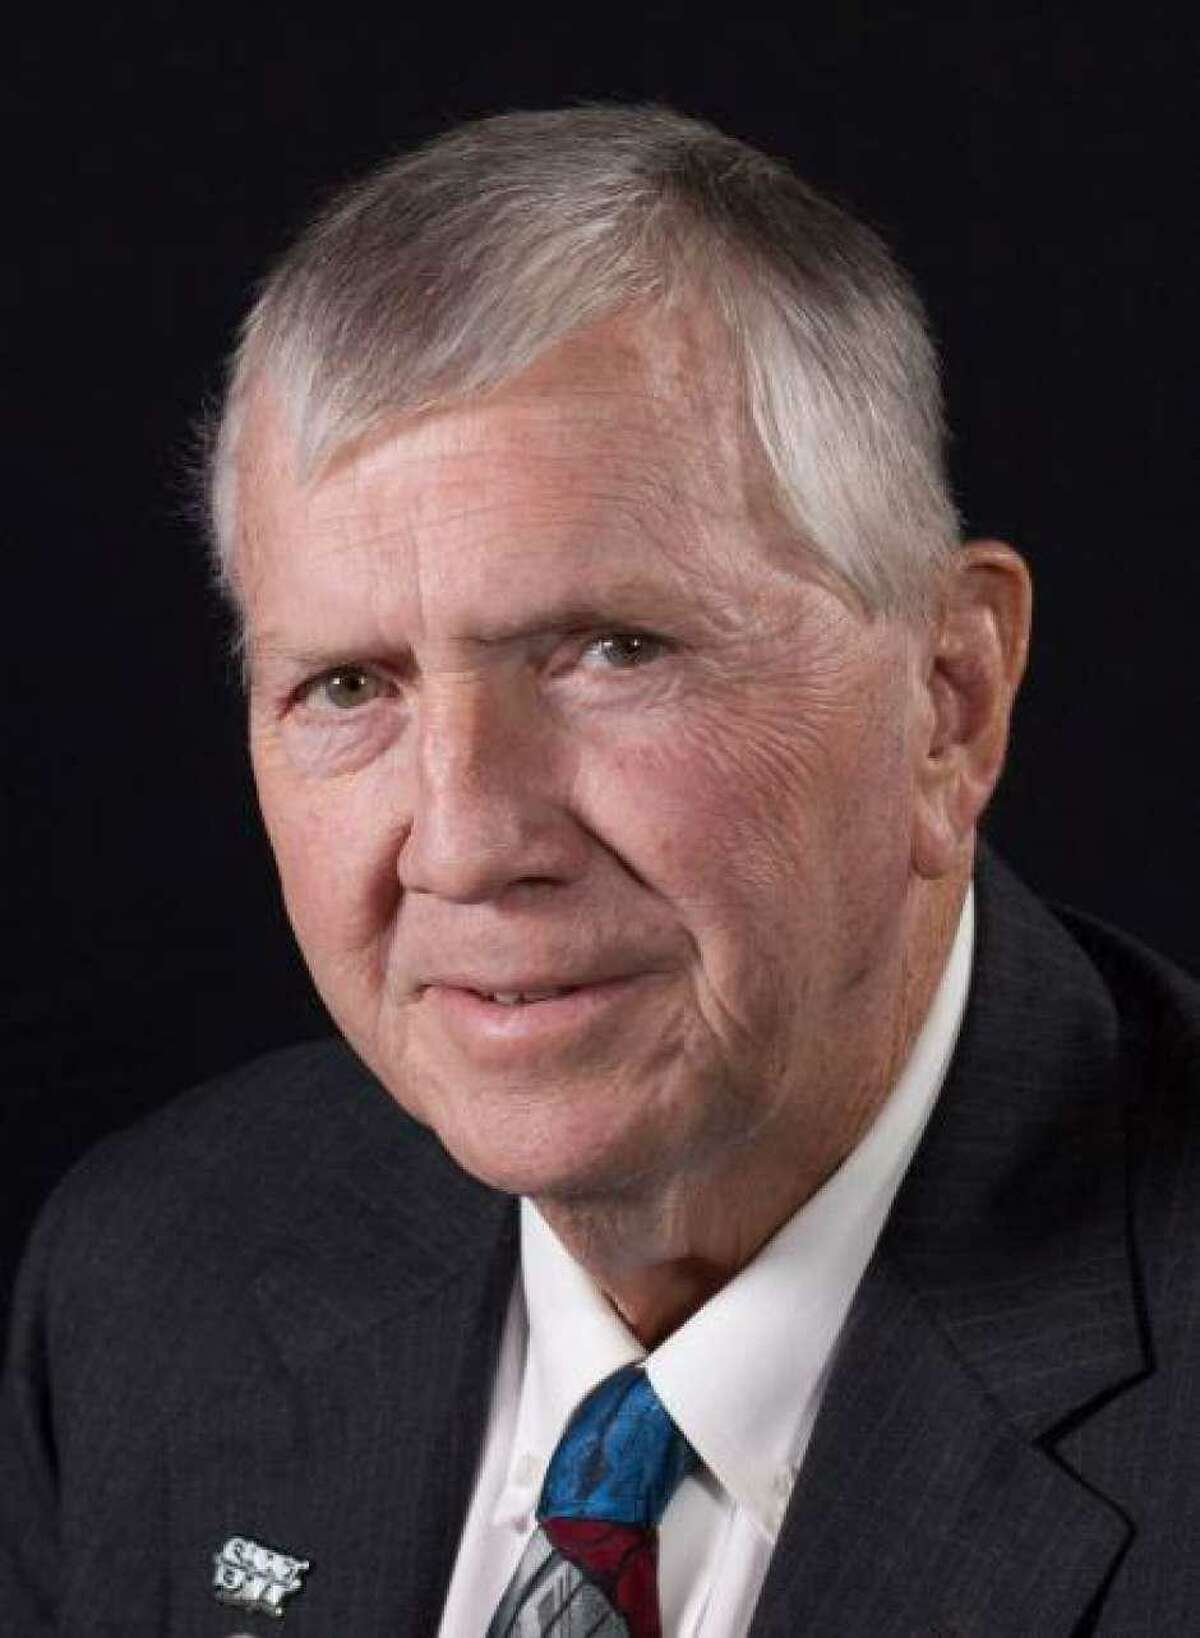 Mike Frazier, longtime trustee for the Southwest Independent School District, has died at 75.